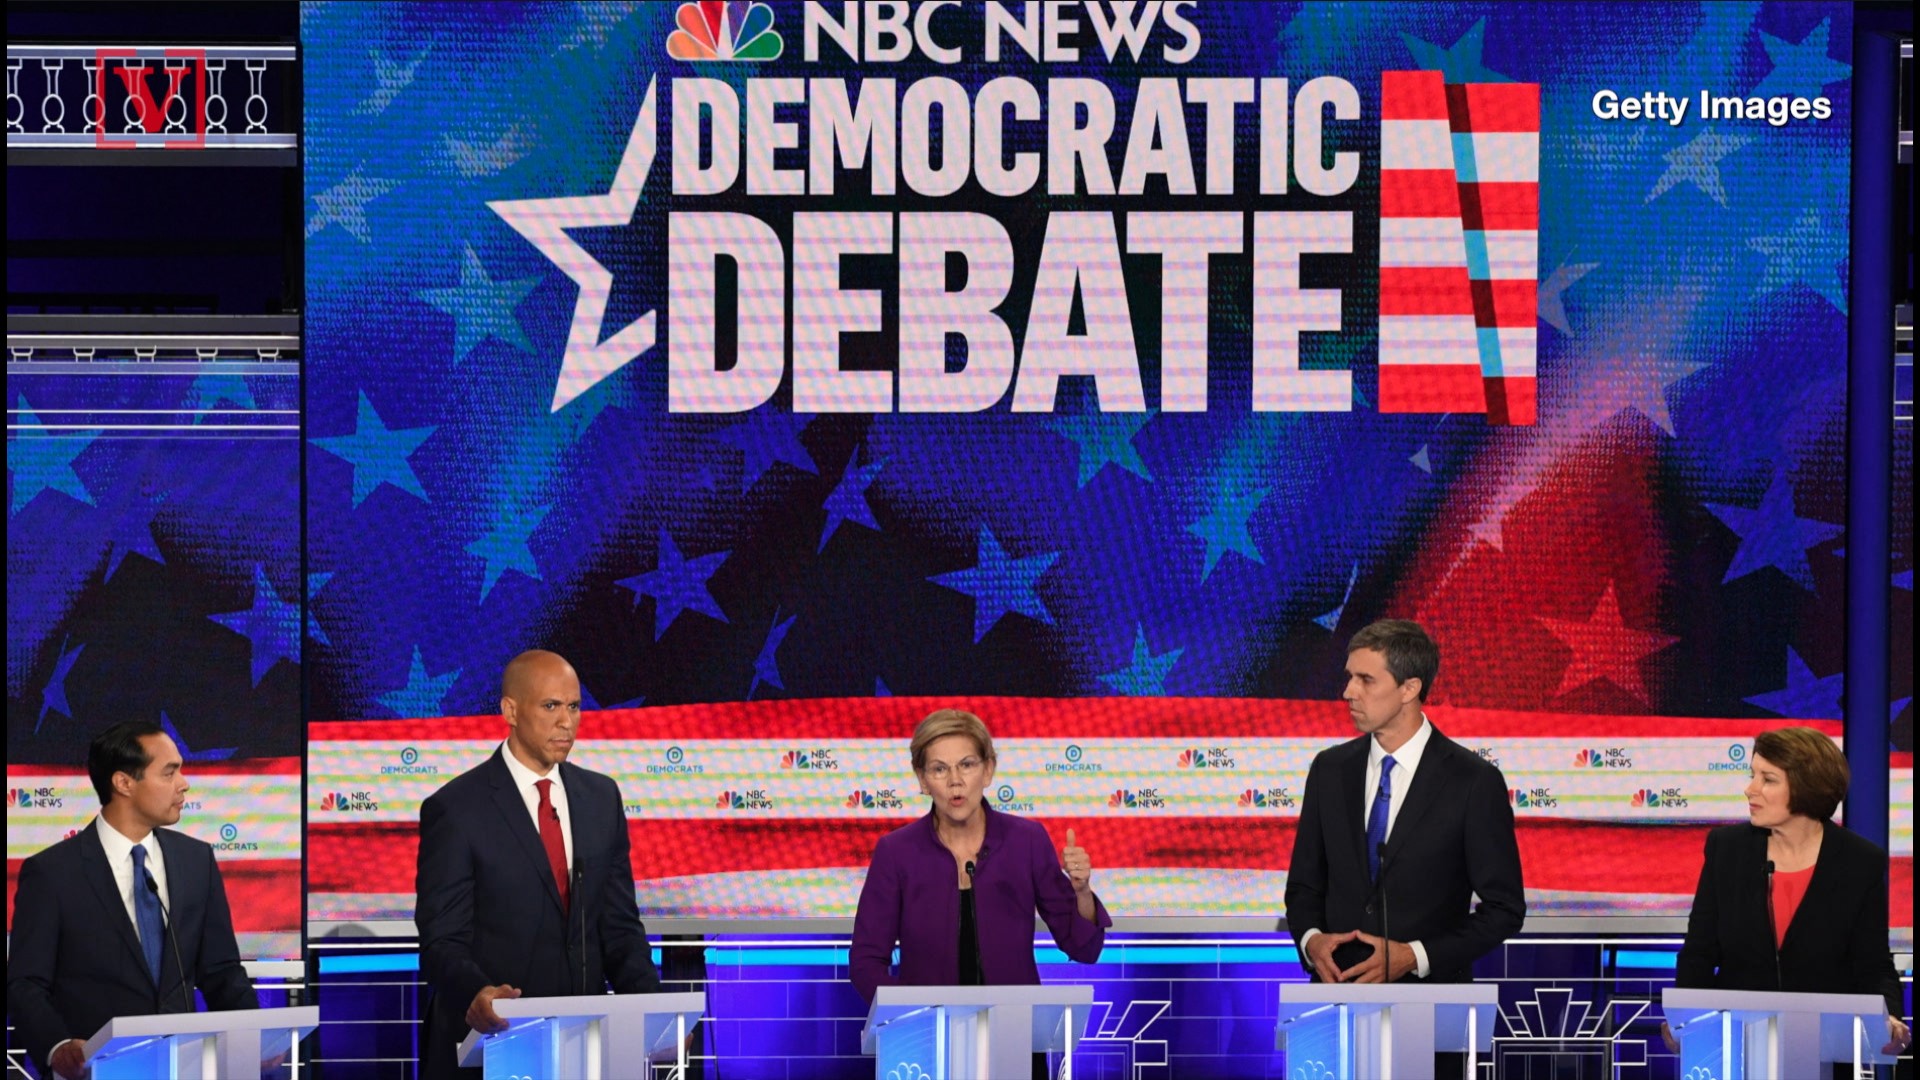 Over two dozen candidates make up the 2020 Democratic field but that number will eventually dwindle and it could start after the second round of debates given these factors. Veuer's Justin Kircher has the story.